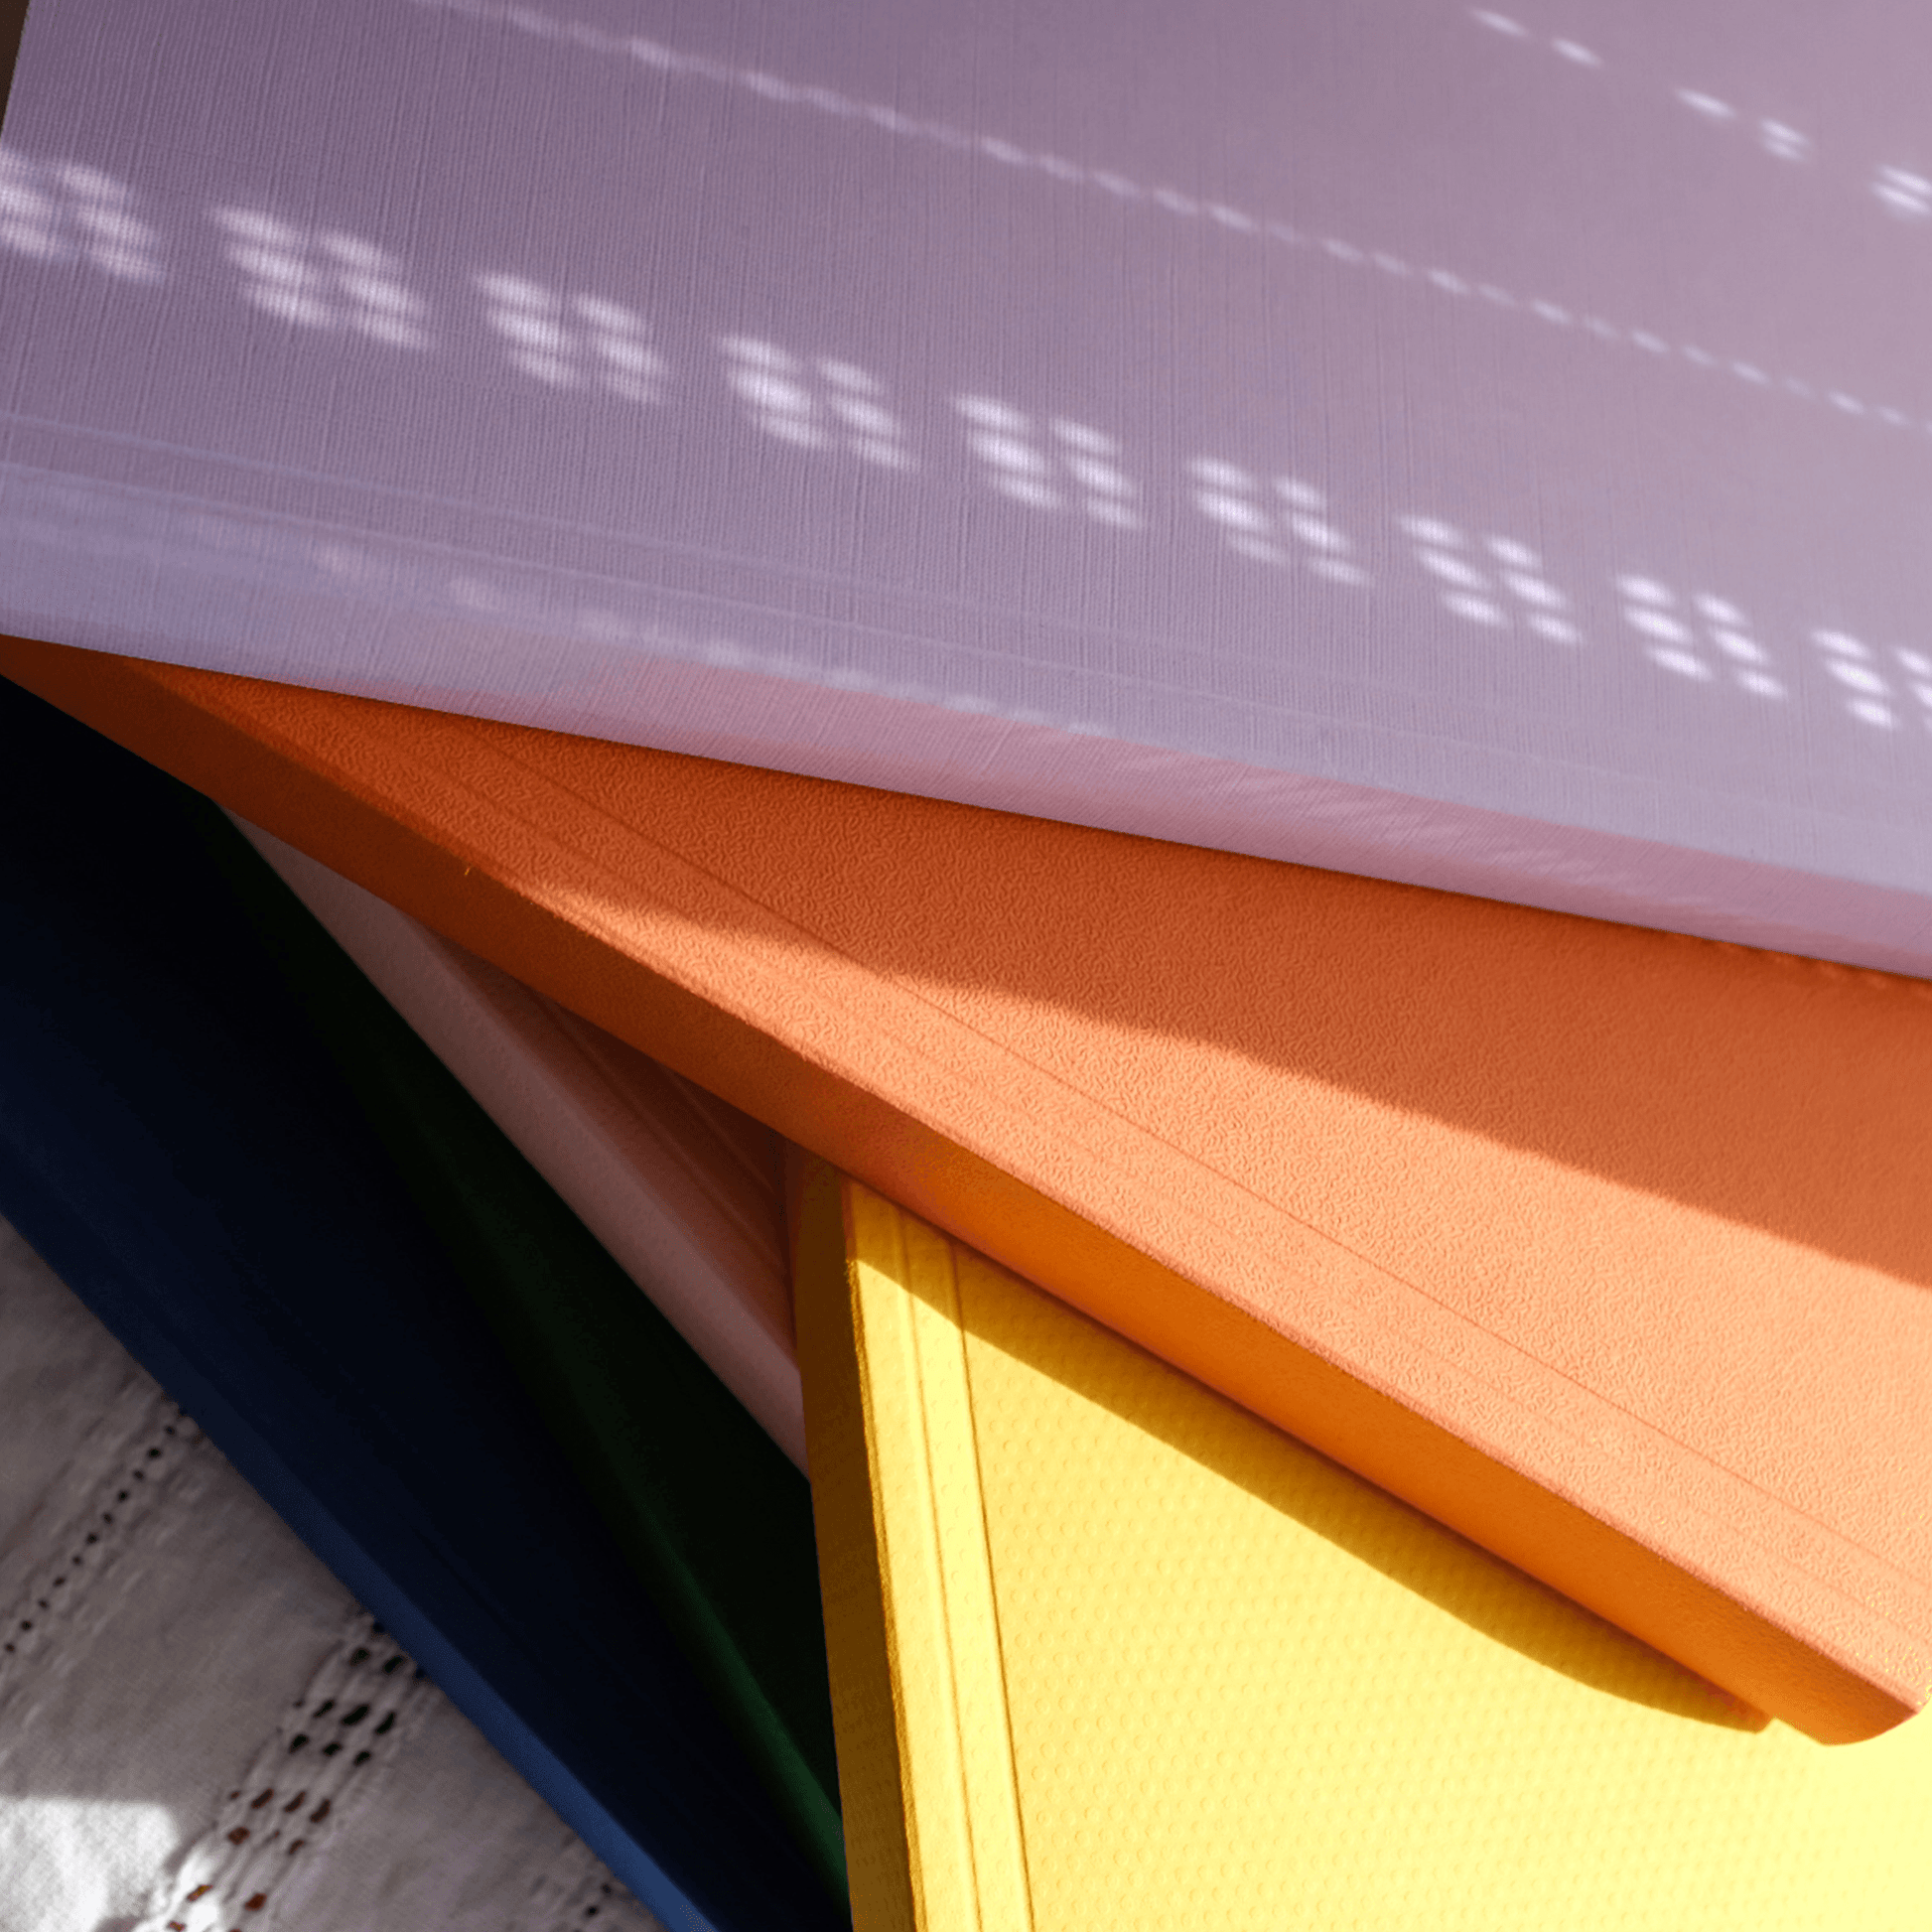 Coloured notebooks